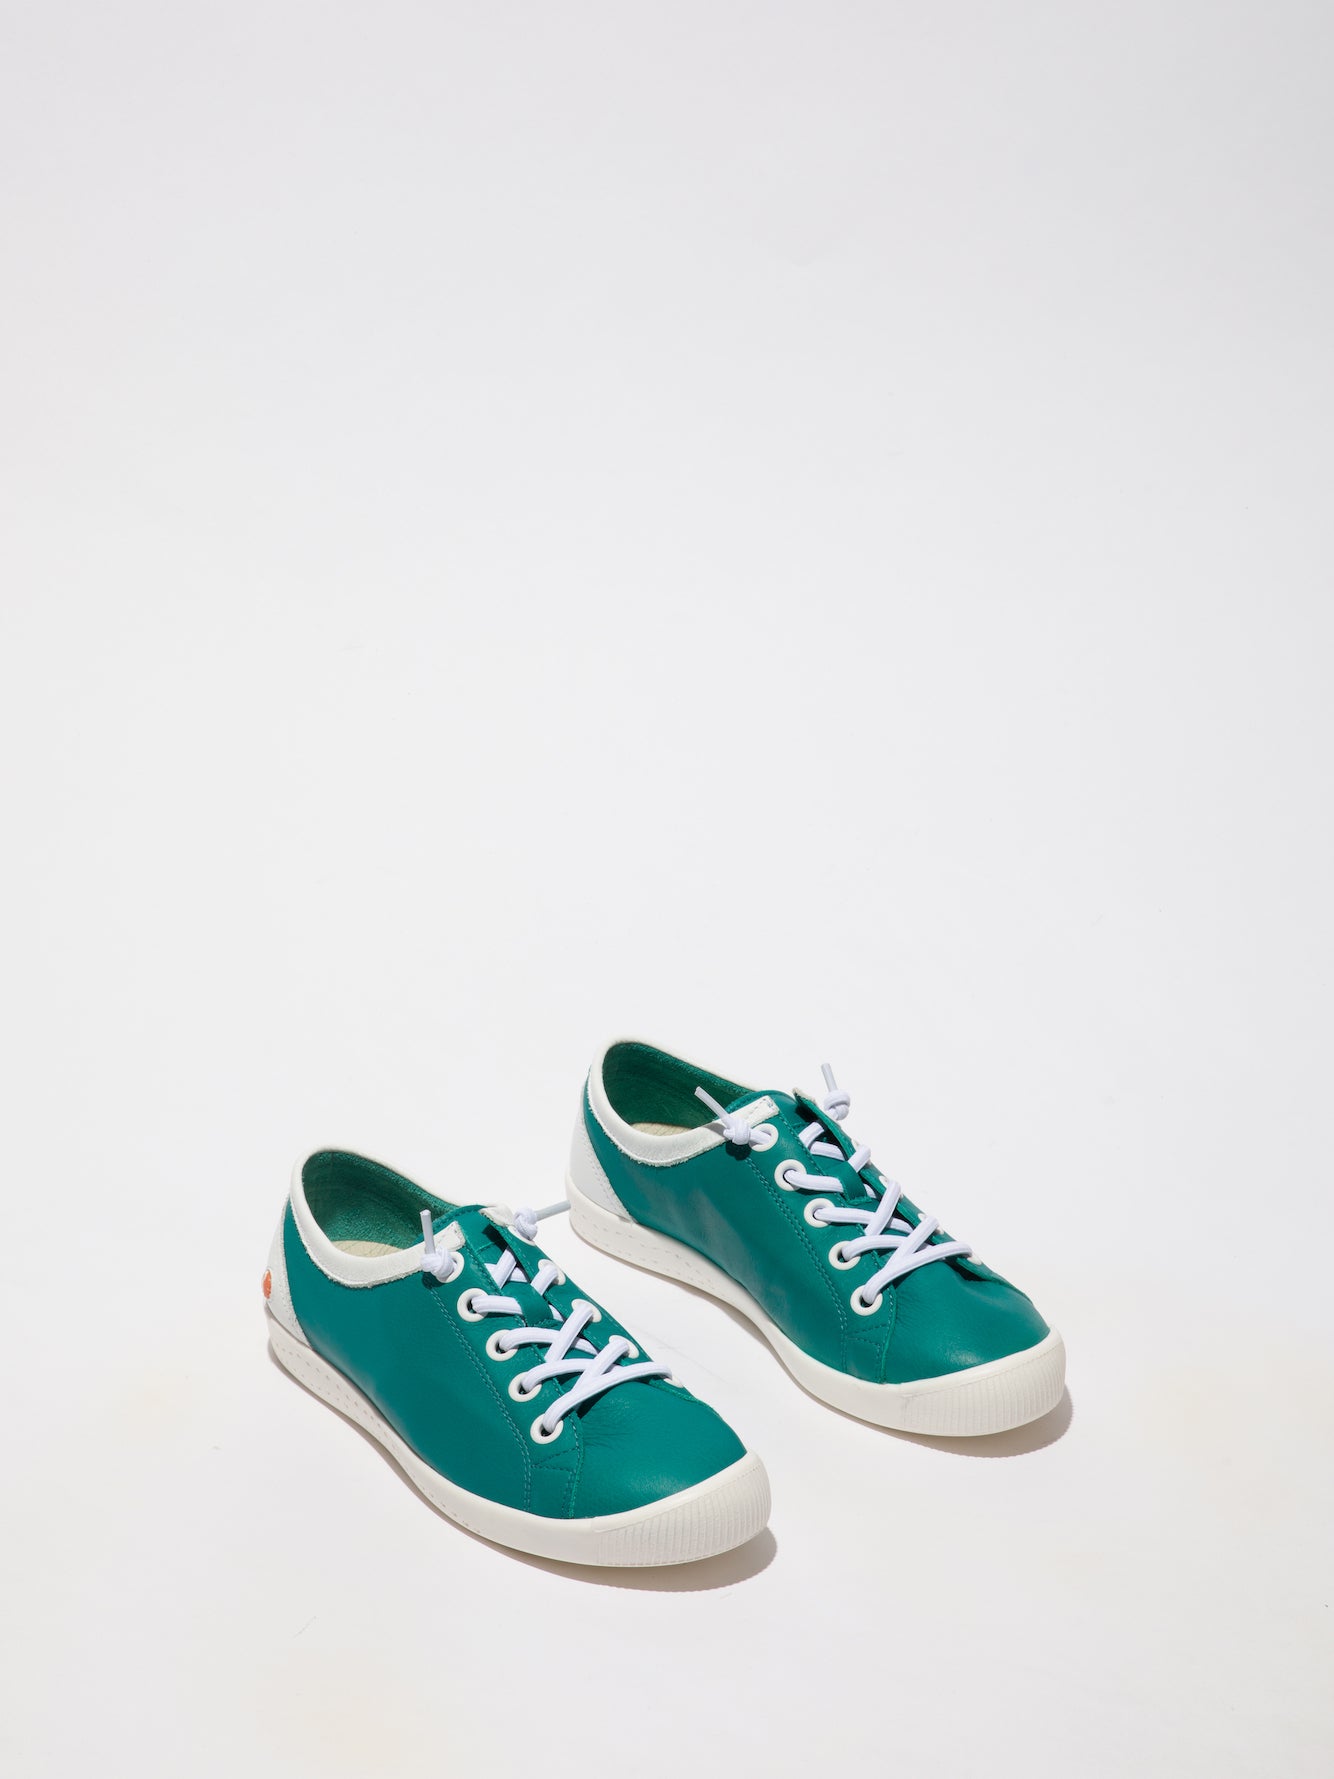 Softinos Isla II 557 Ladies Petrol Green And White Leather Elasticated Shoes